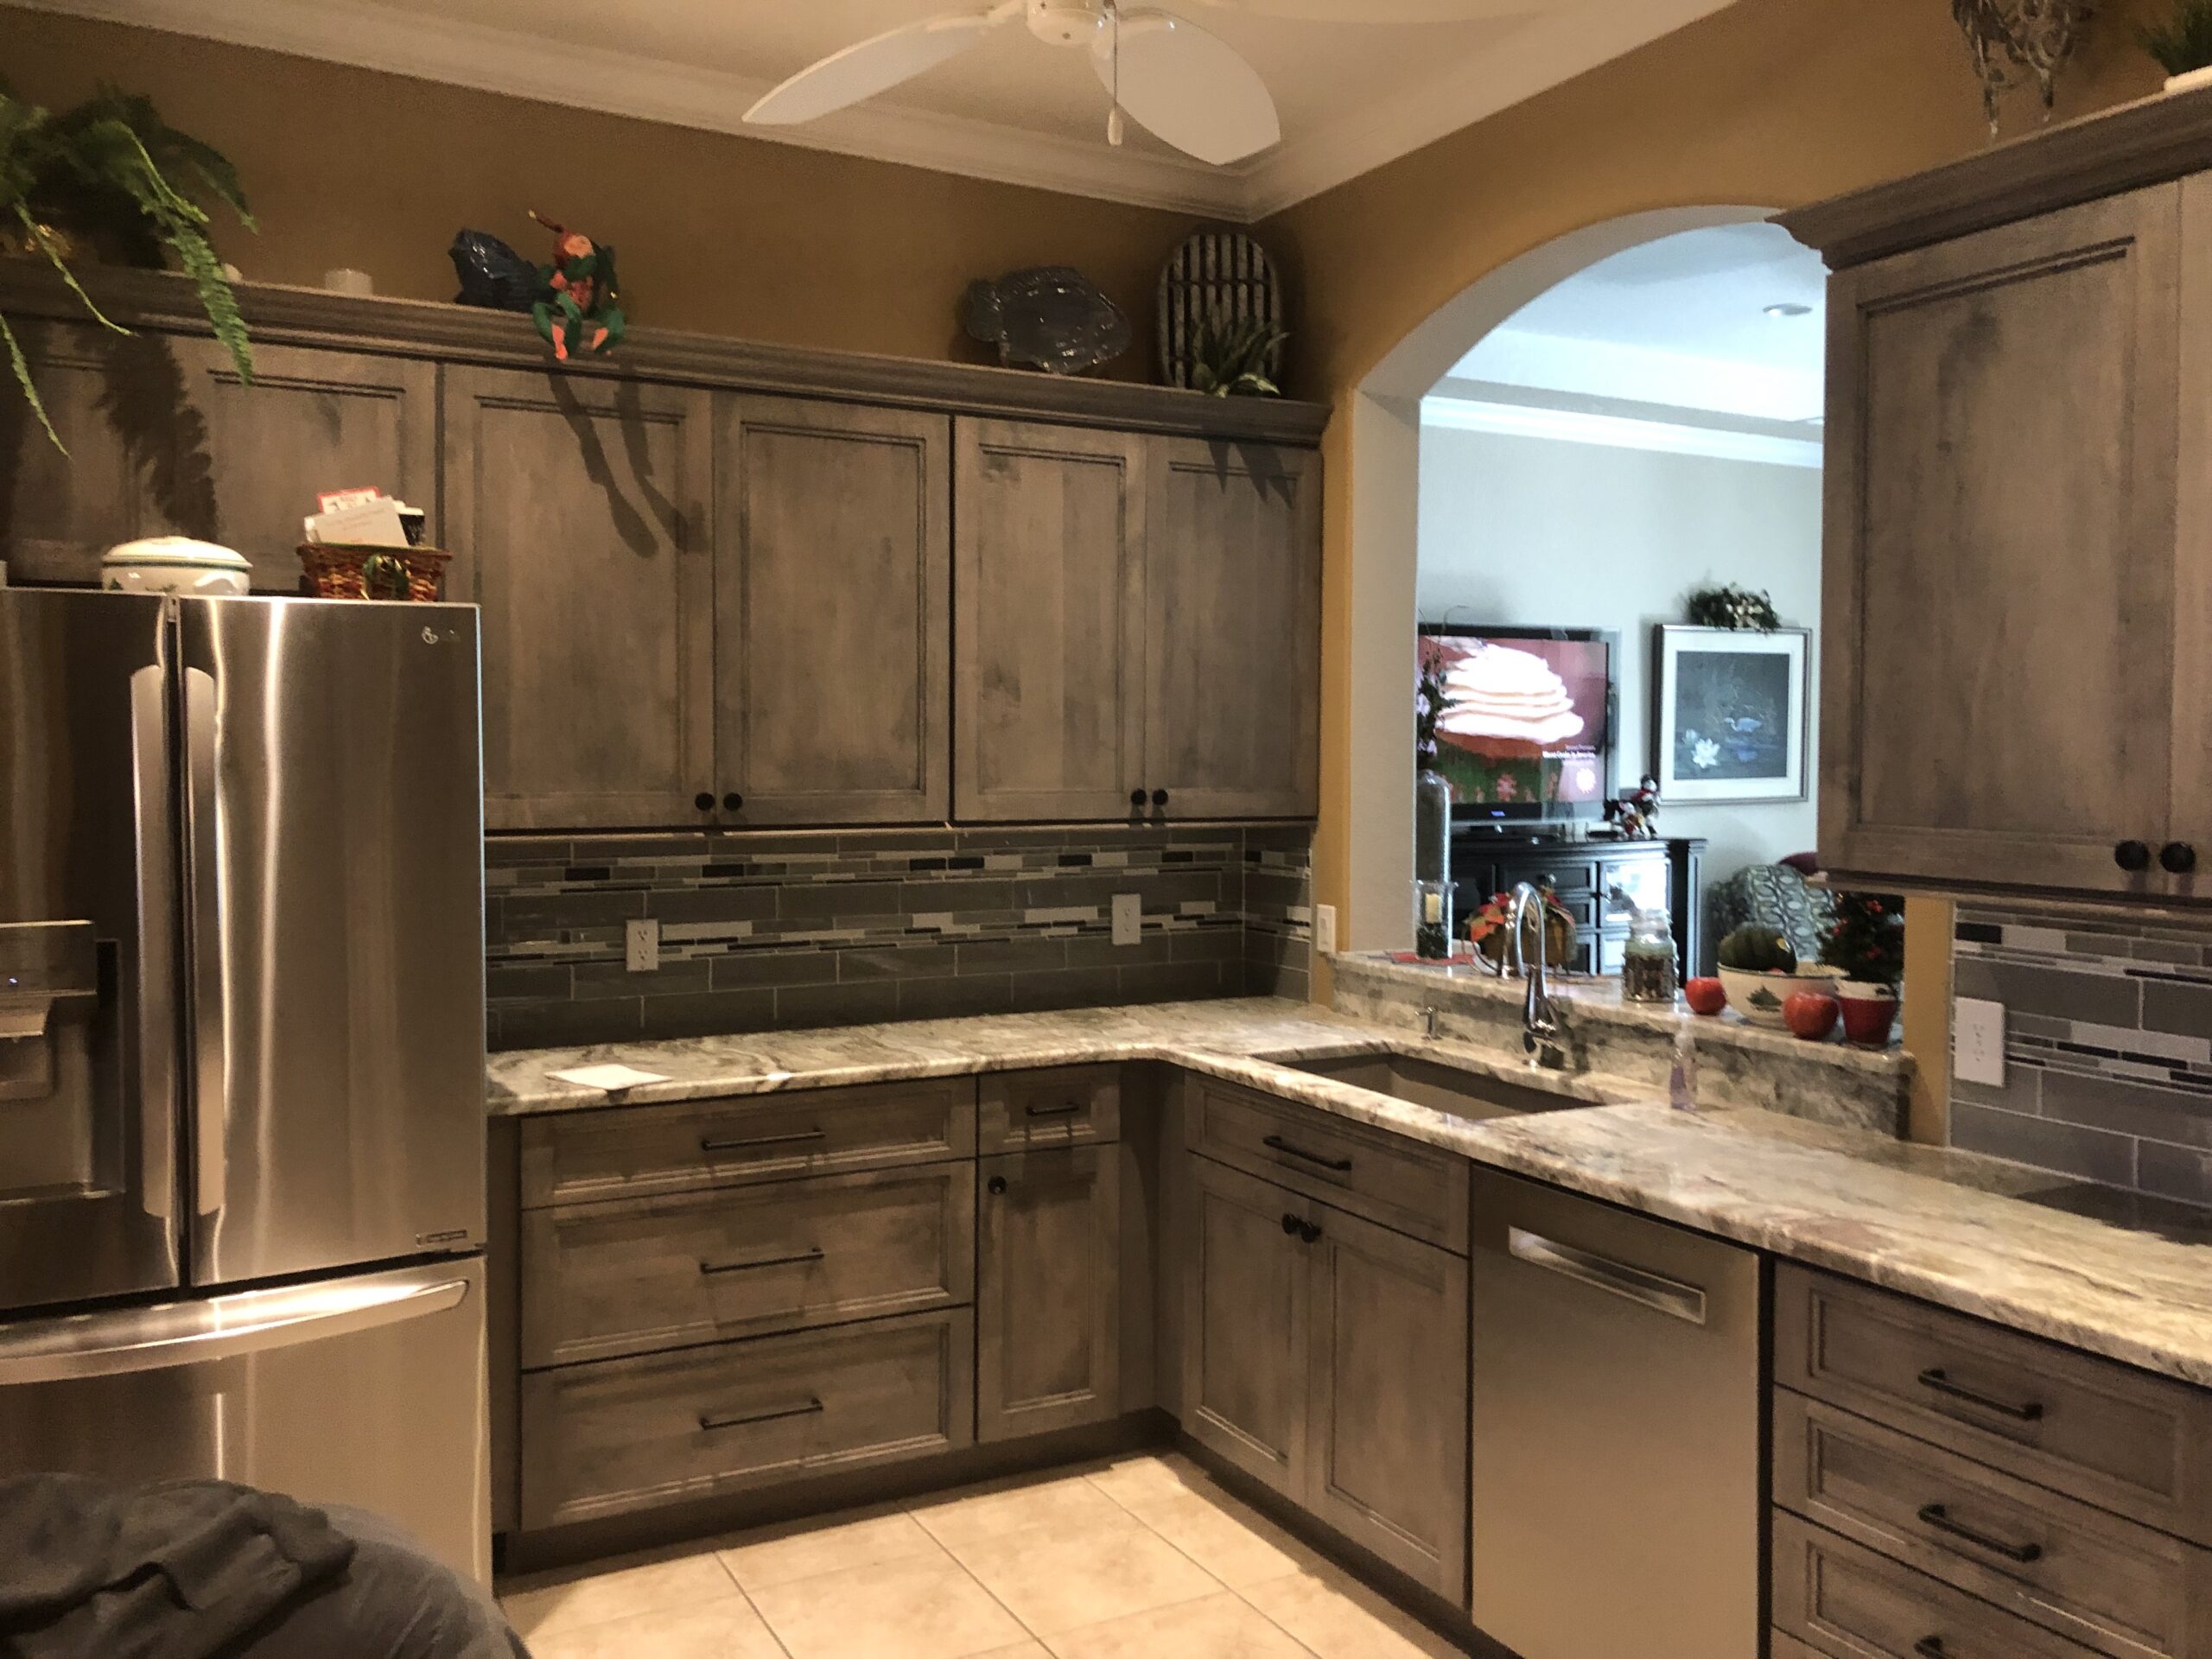 Modern, Stylish, and High Quality Stained Cherry Kitchen Cabinet Refacing in Valrico